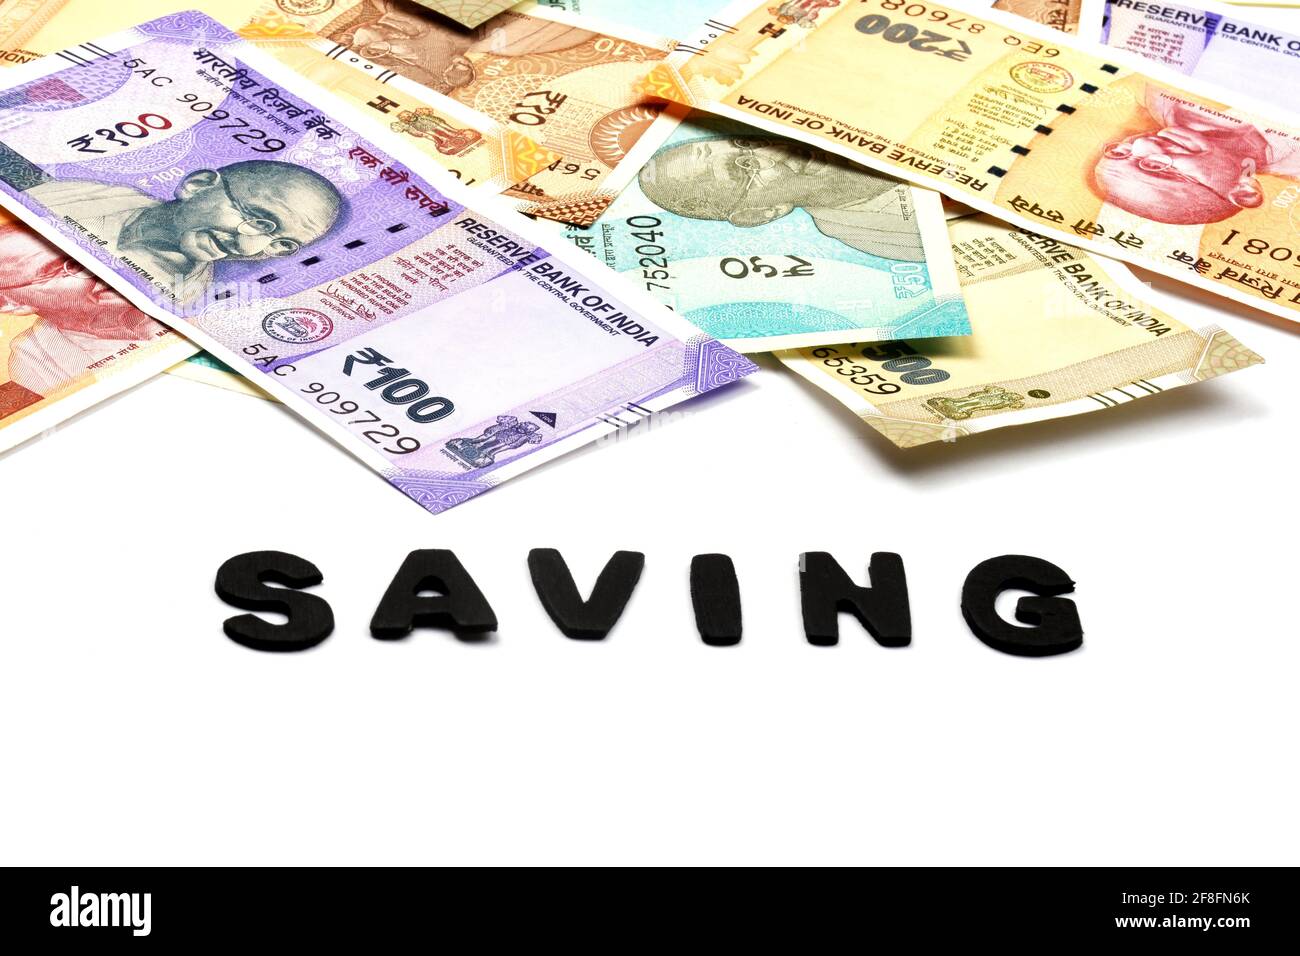 Saving money concept, saving alphabet on money background, Indian Currency, Rupee, Indian Rupee, Indian Money, Business, finance, investment, Stock Photo